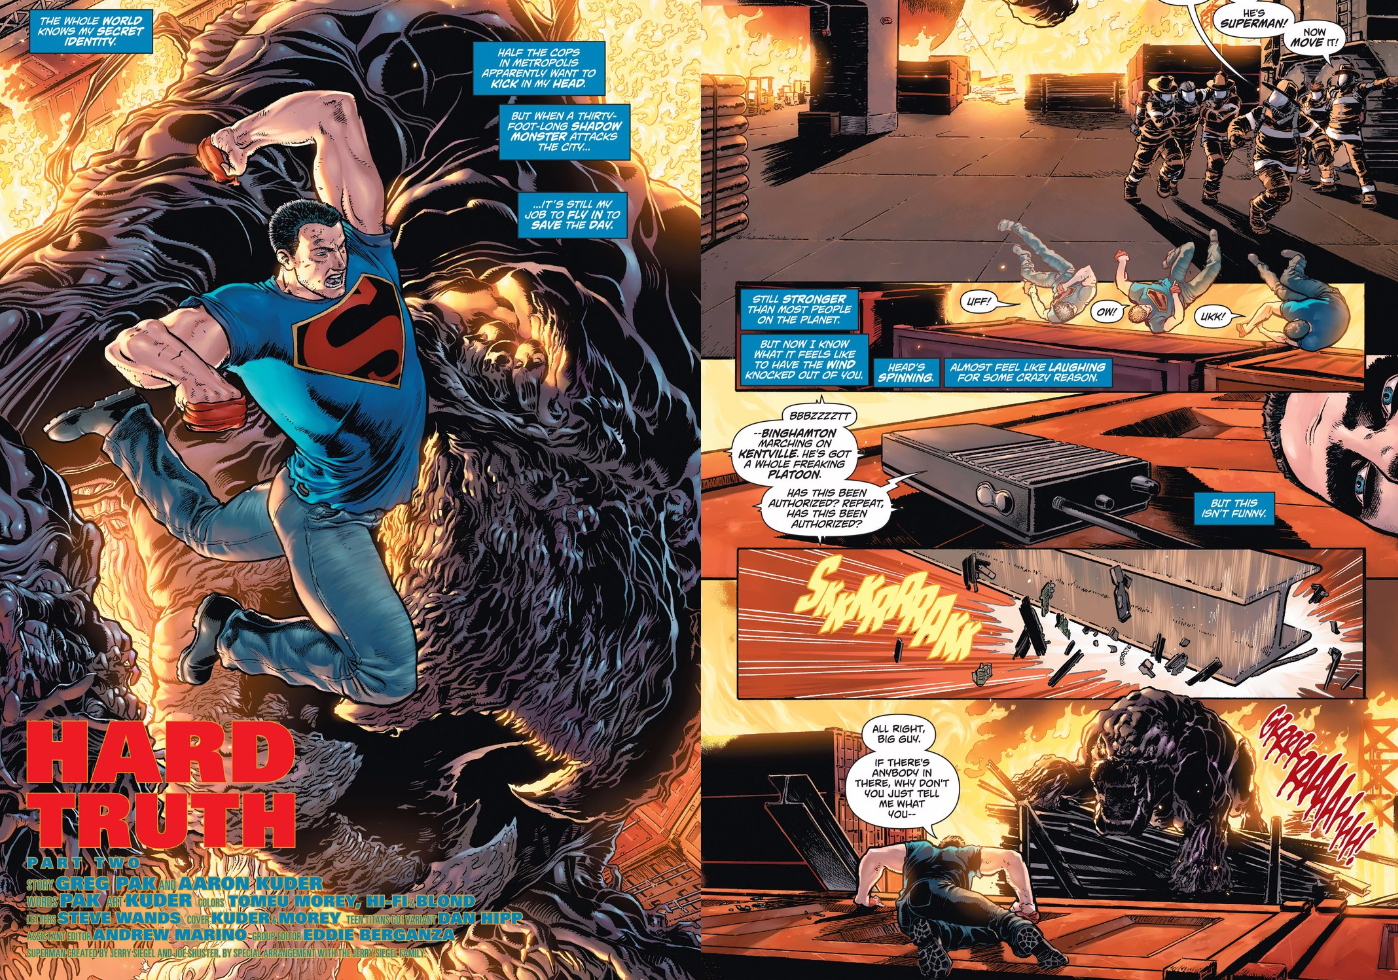 This Week’s Superman Comic Is Basically About Ferguson